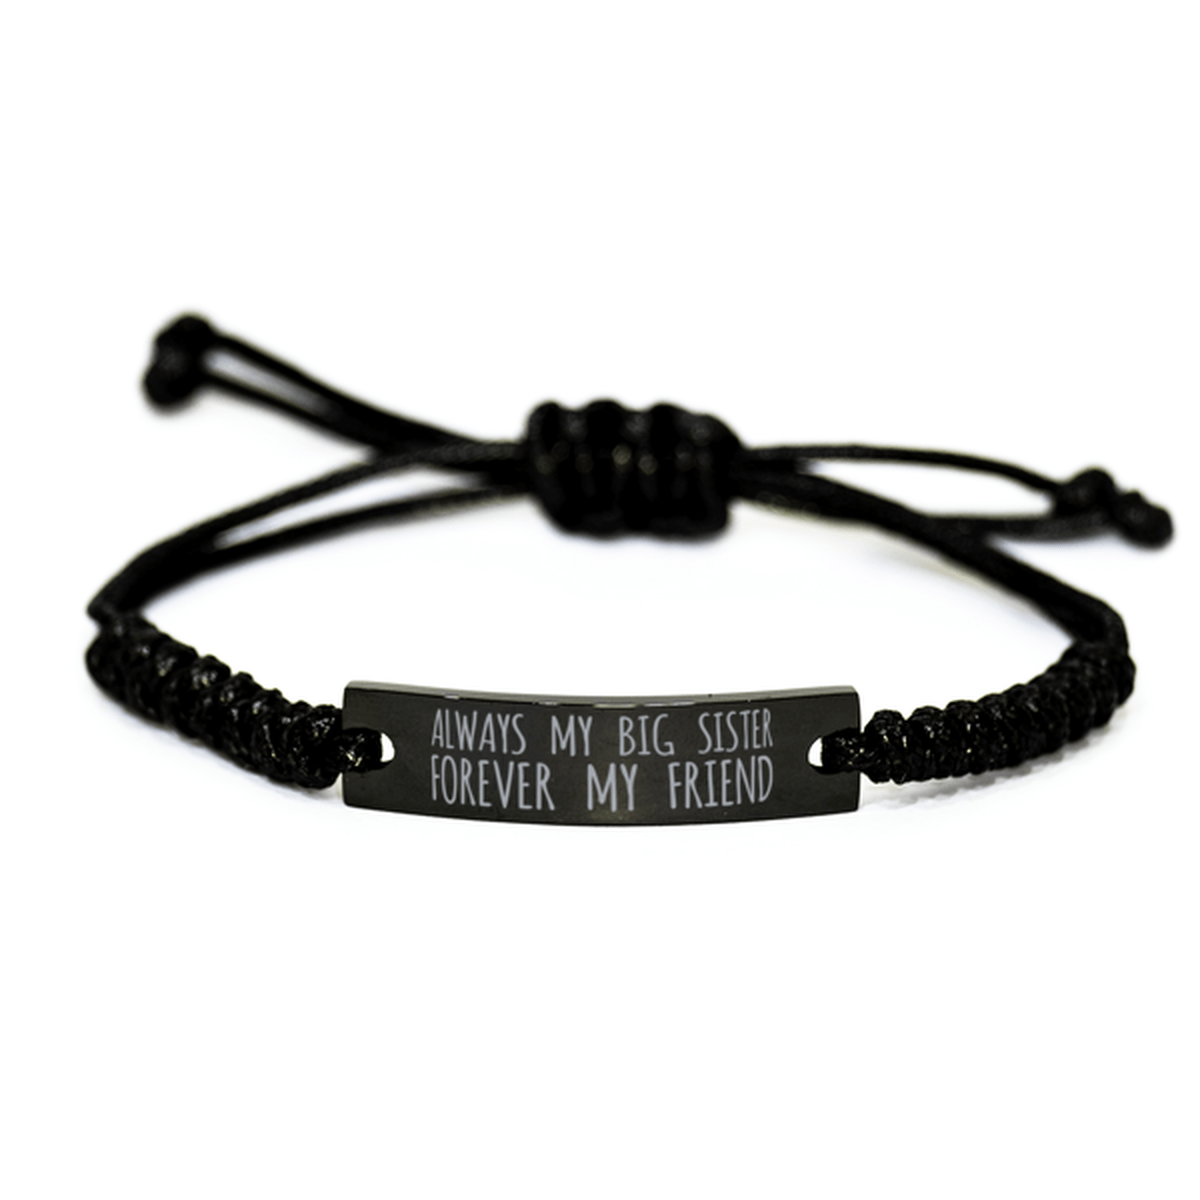 Inspirational Big Sister Black Rope Bracelet, Always My Big Sister Forever My Friend, Best Birthday Gifts For Family